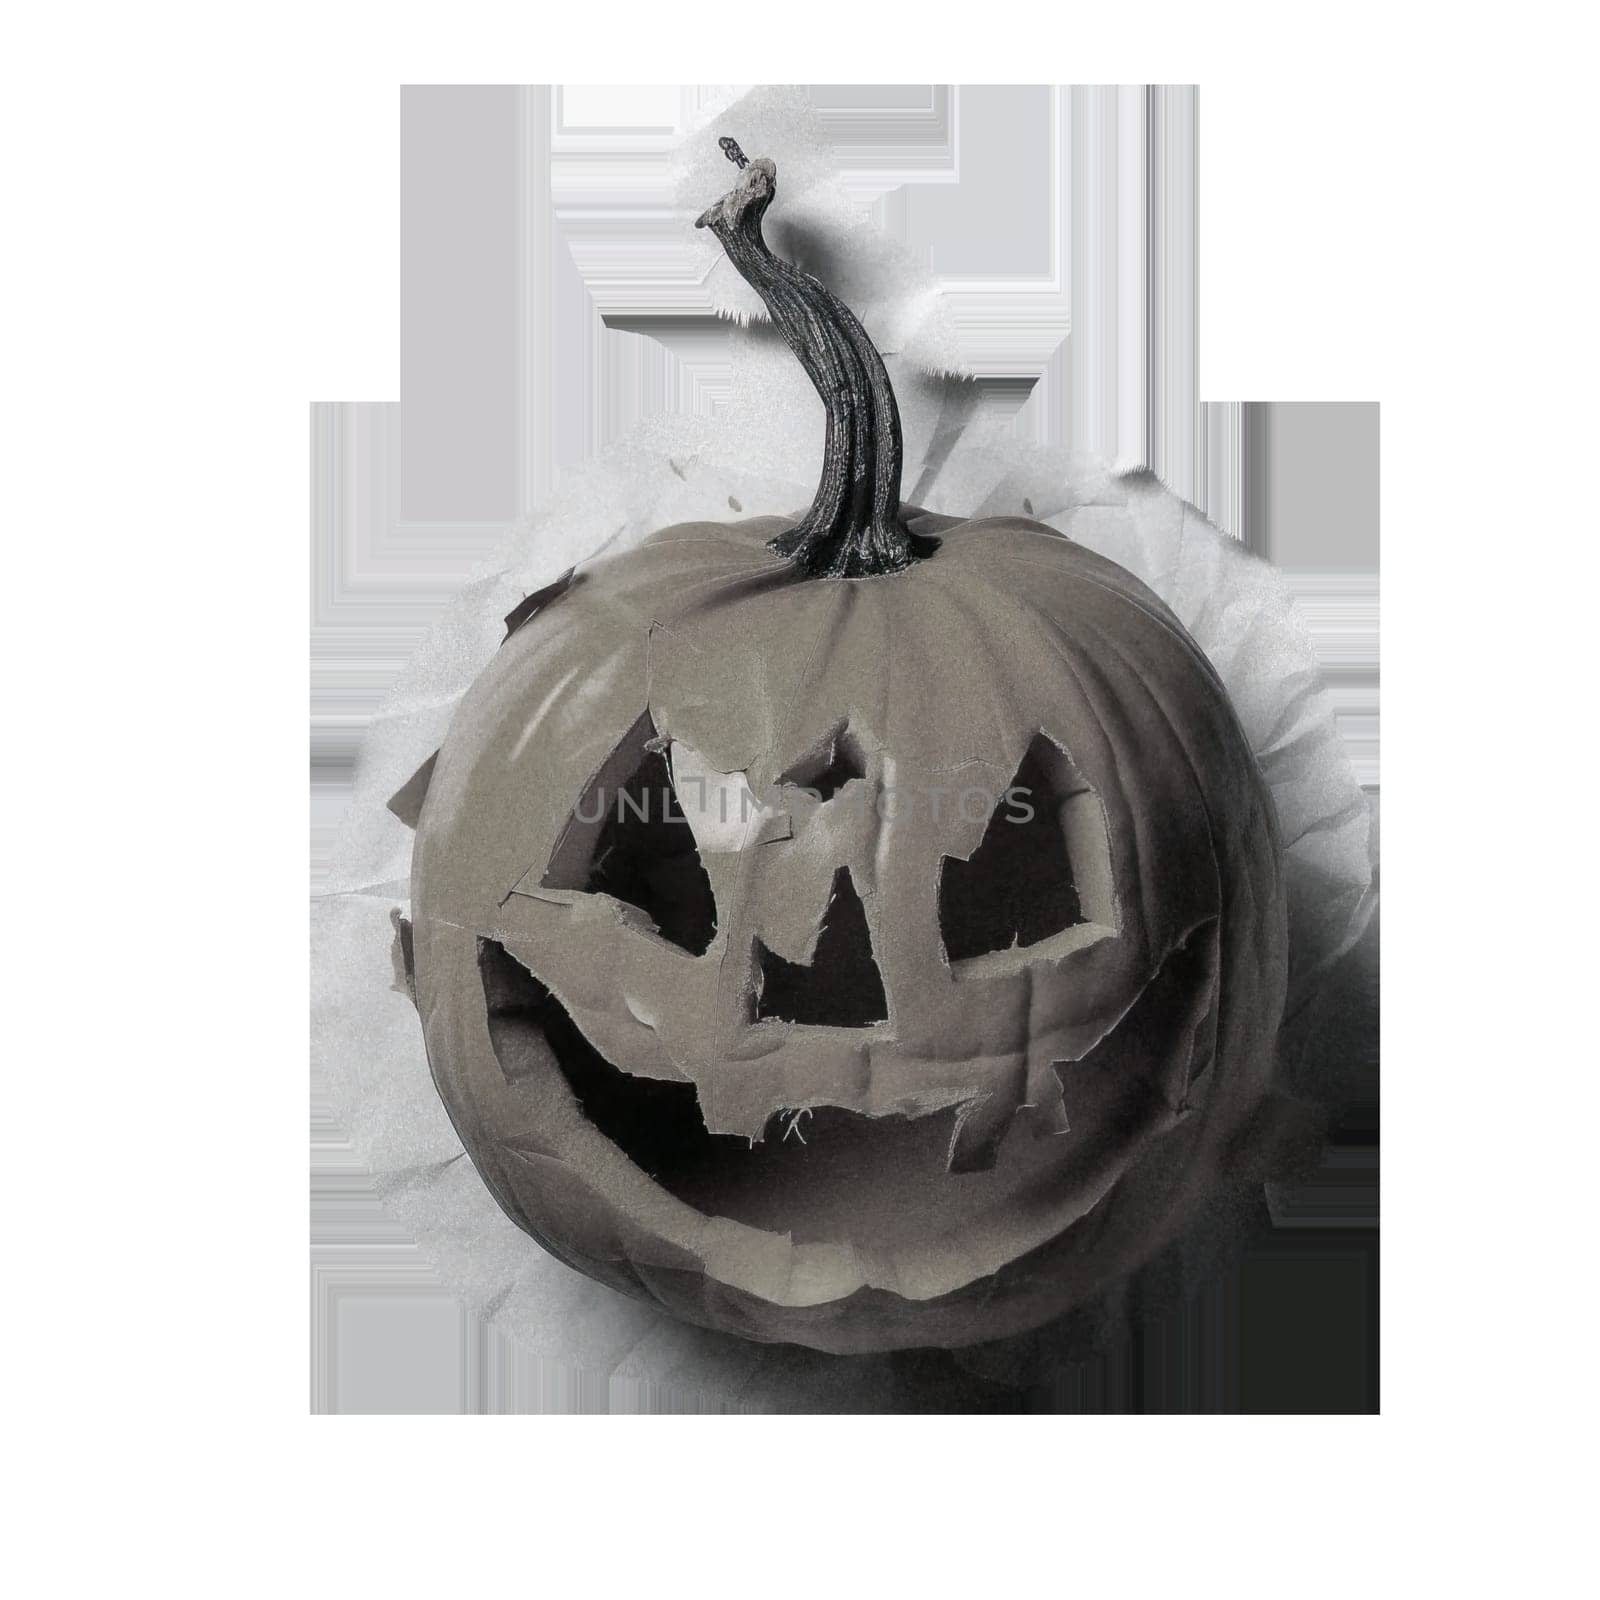 Monochrome vintage photo of halloween pumpkin cut out image by Dustick